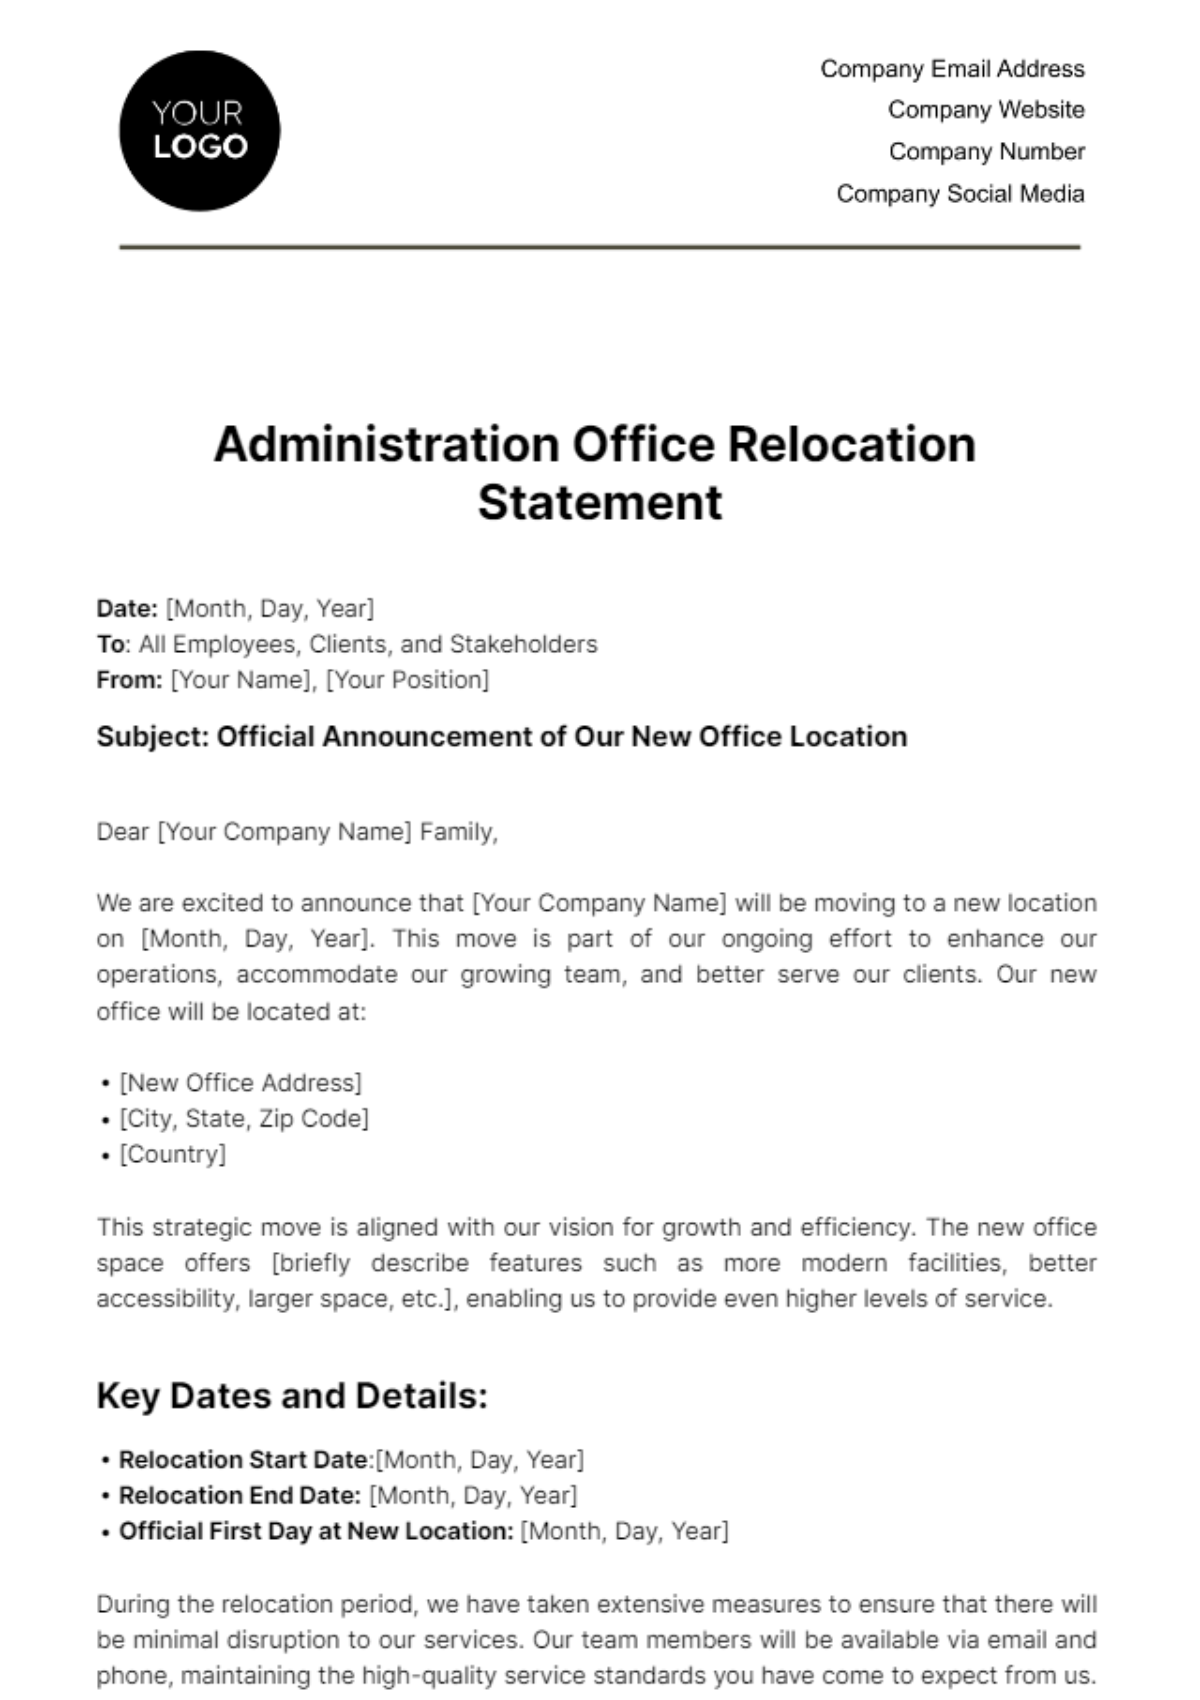 Administration Office Relocation Statement Template